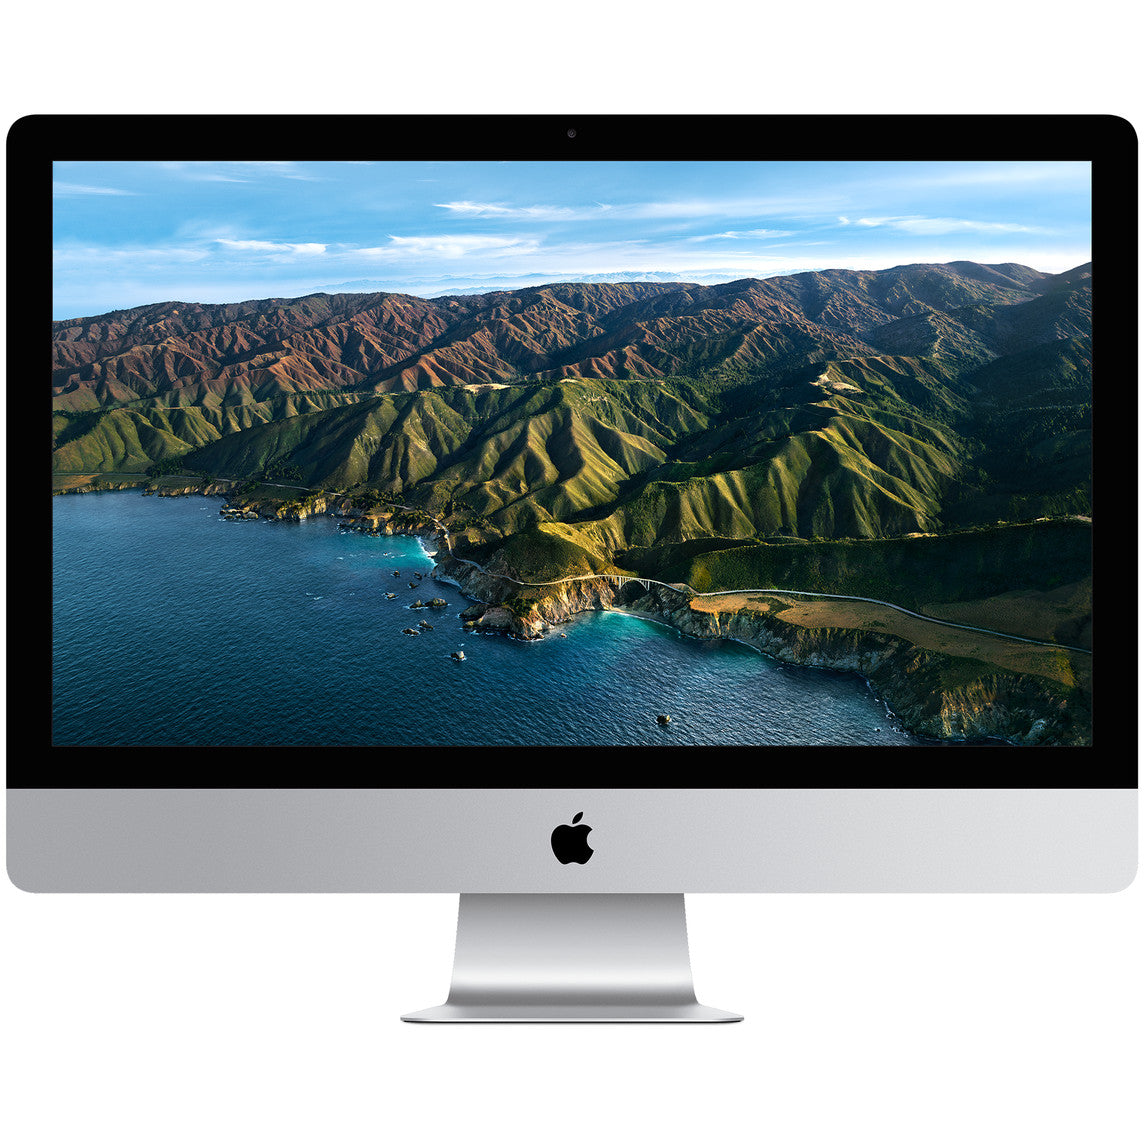 iMac 27-inch 5K iMac 2020 - 10th Gen Intel Core i9 3.6Ghz (boost to 5.0Ghz) AMD Radeon Pro 5300 with Dedicated 4GB Graphics! 1TB NVME super fast SSD and 32GB Ram